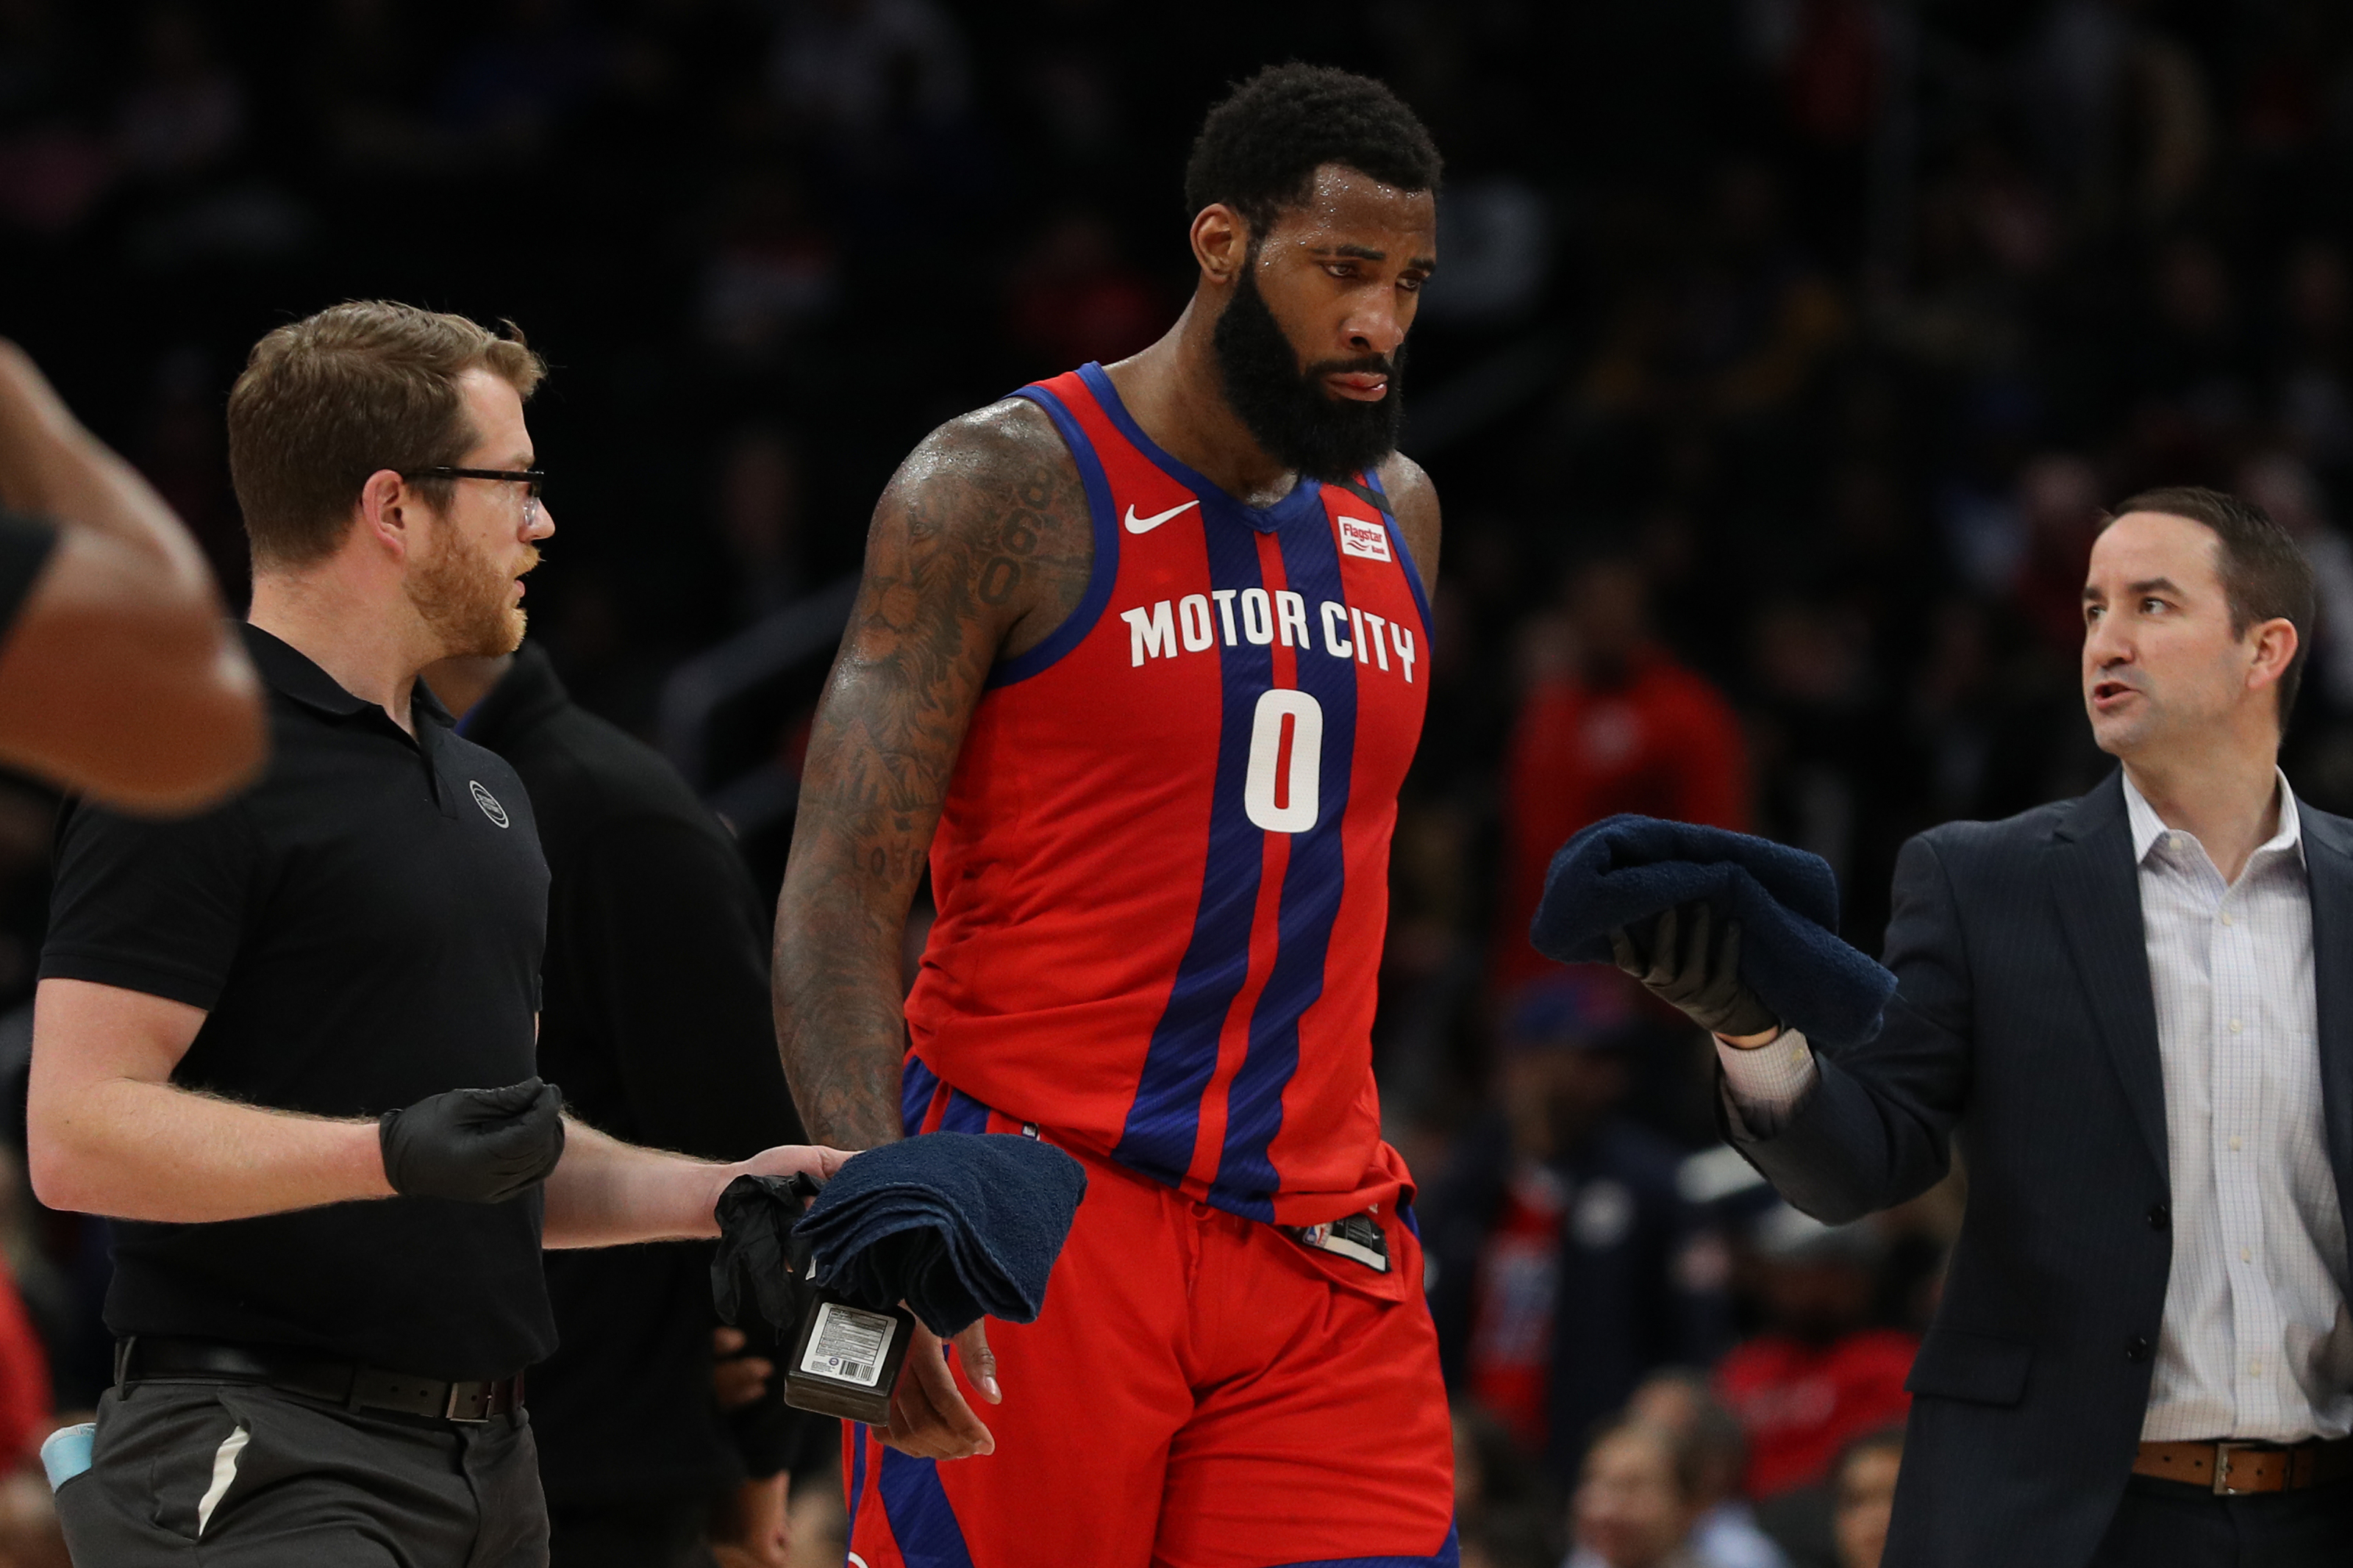 Andre Drummond justified to be upset with Detroit Pistons after trade?